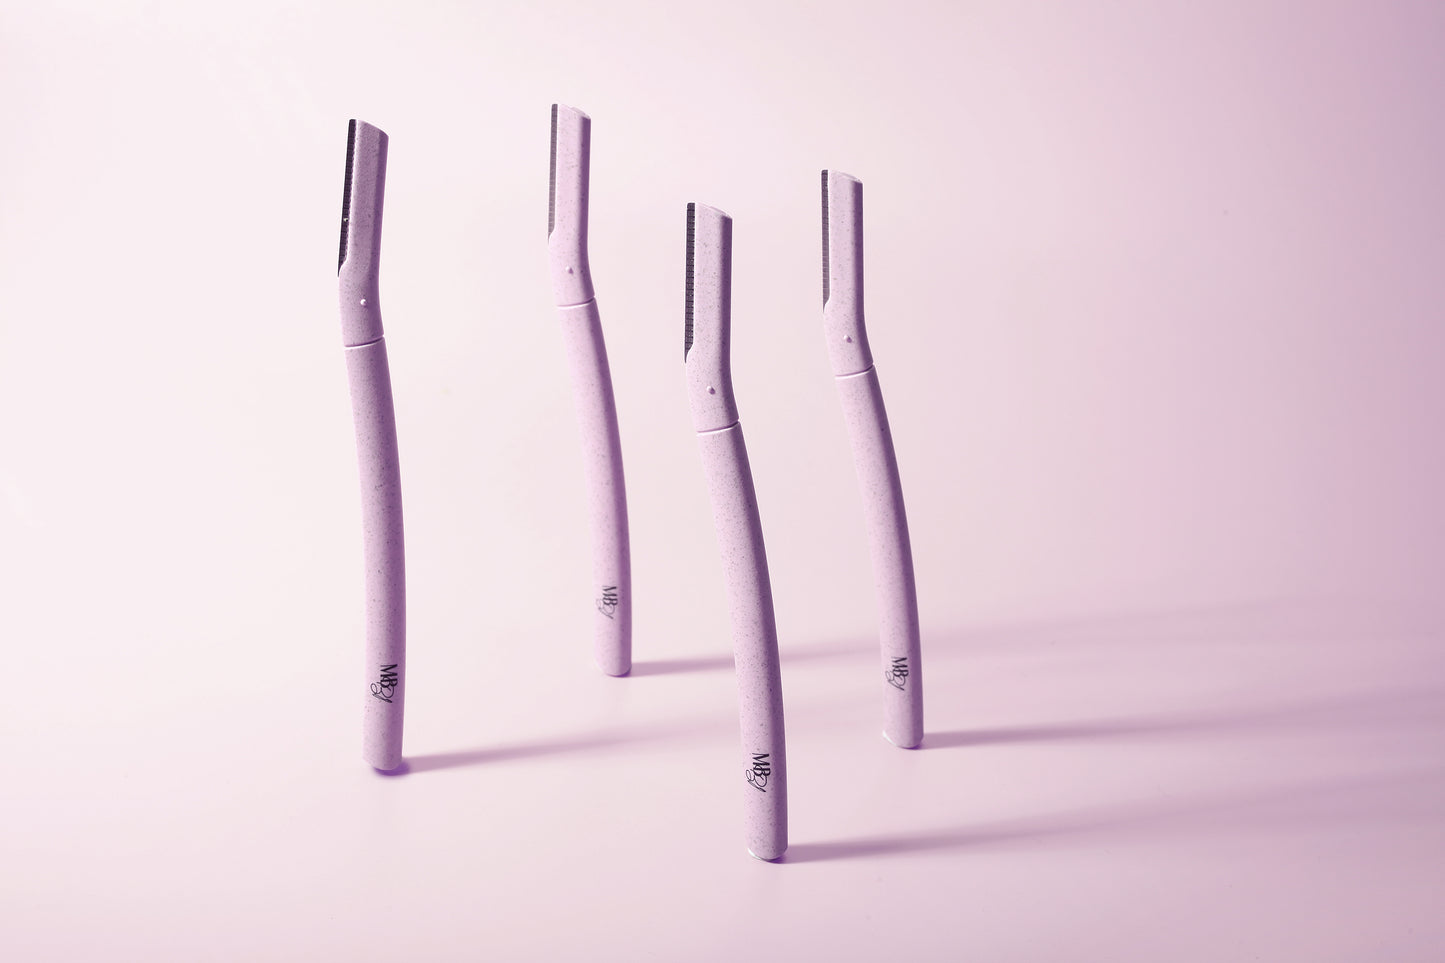 4 PACK- Personal Beauty Blades